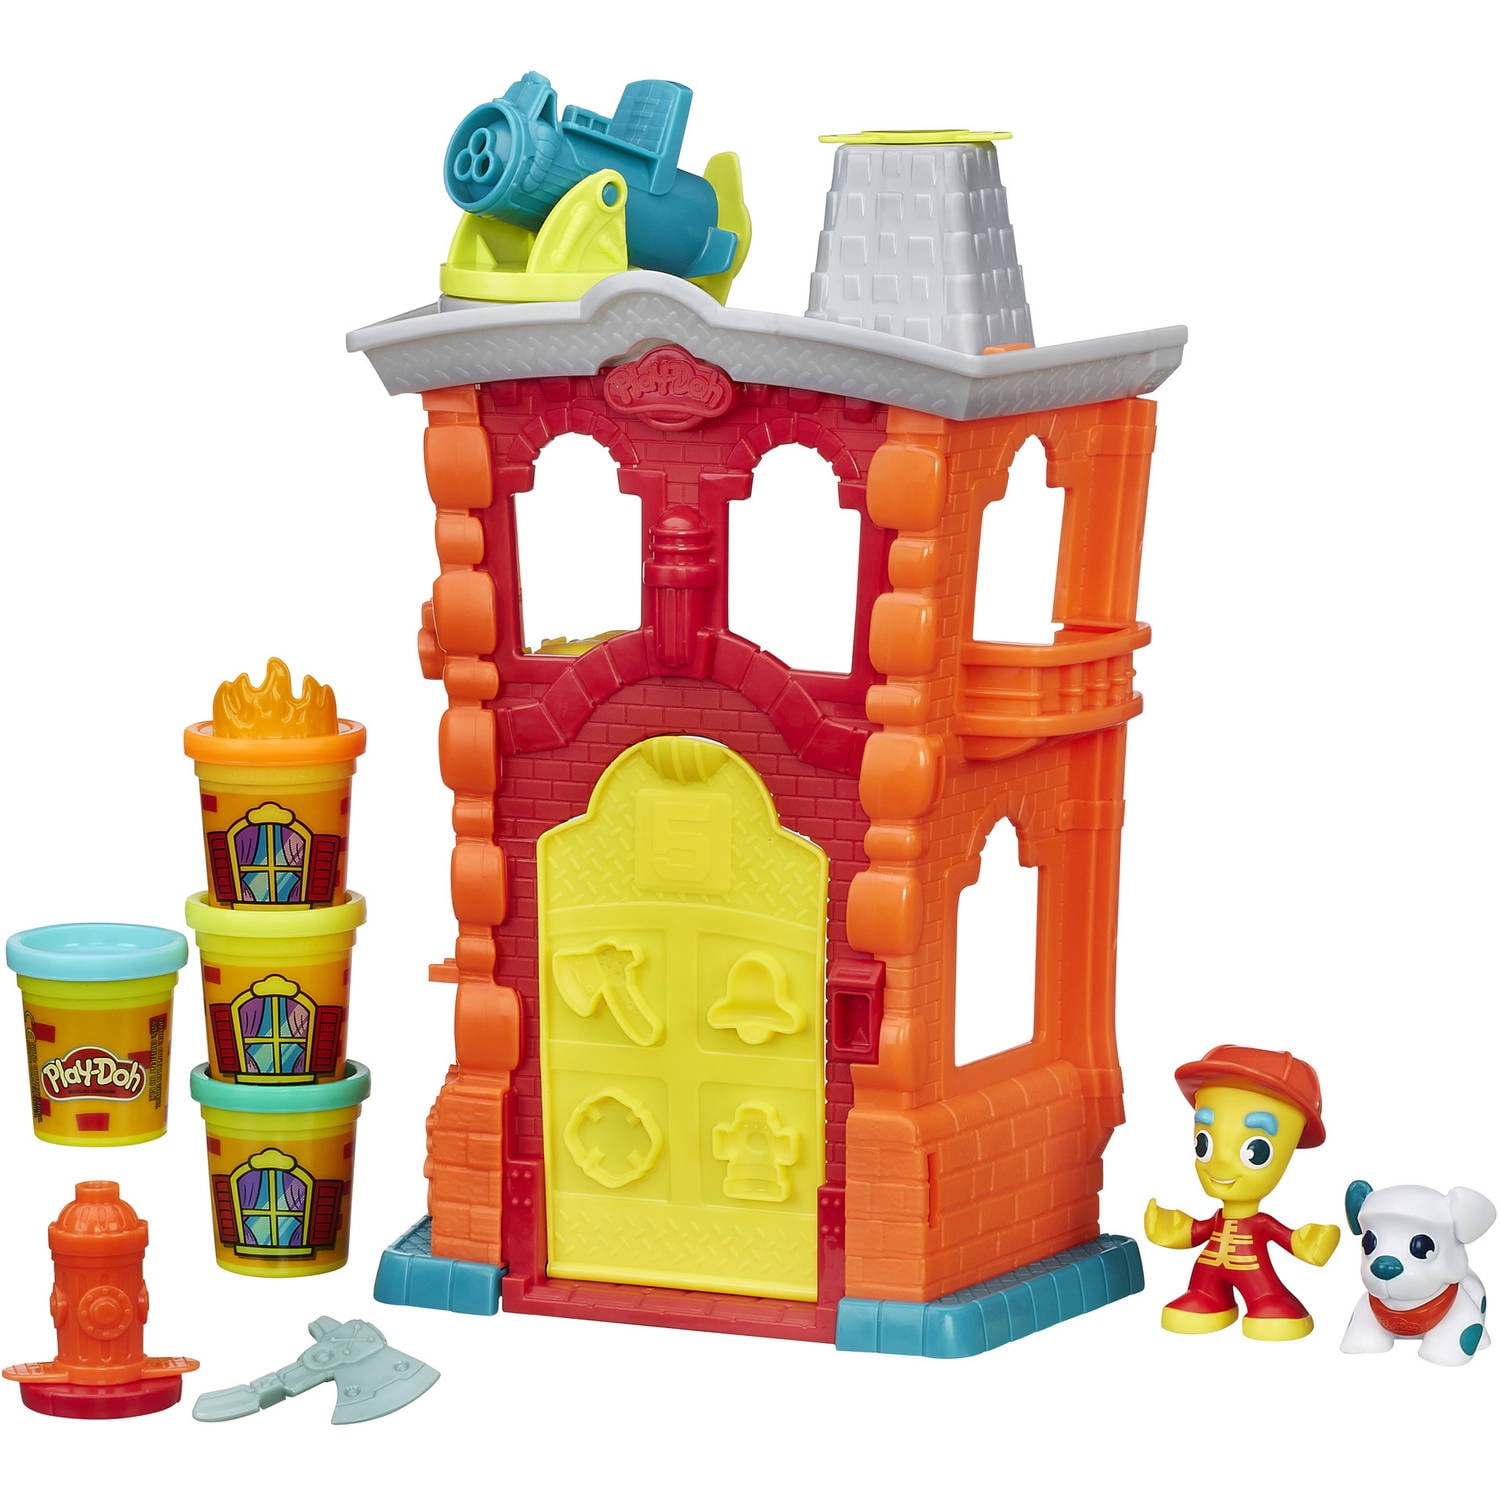 Play-Doh Town Firehouse Modeling Compound Playset NEW! 